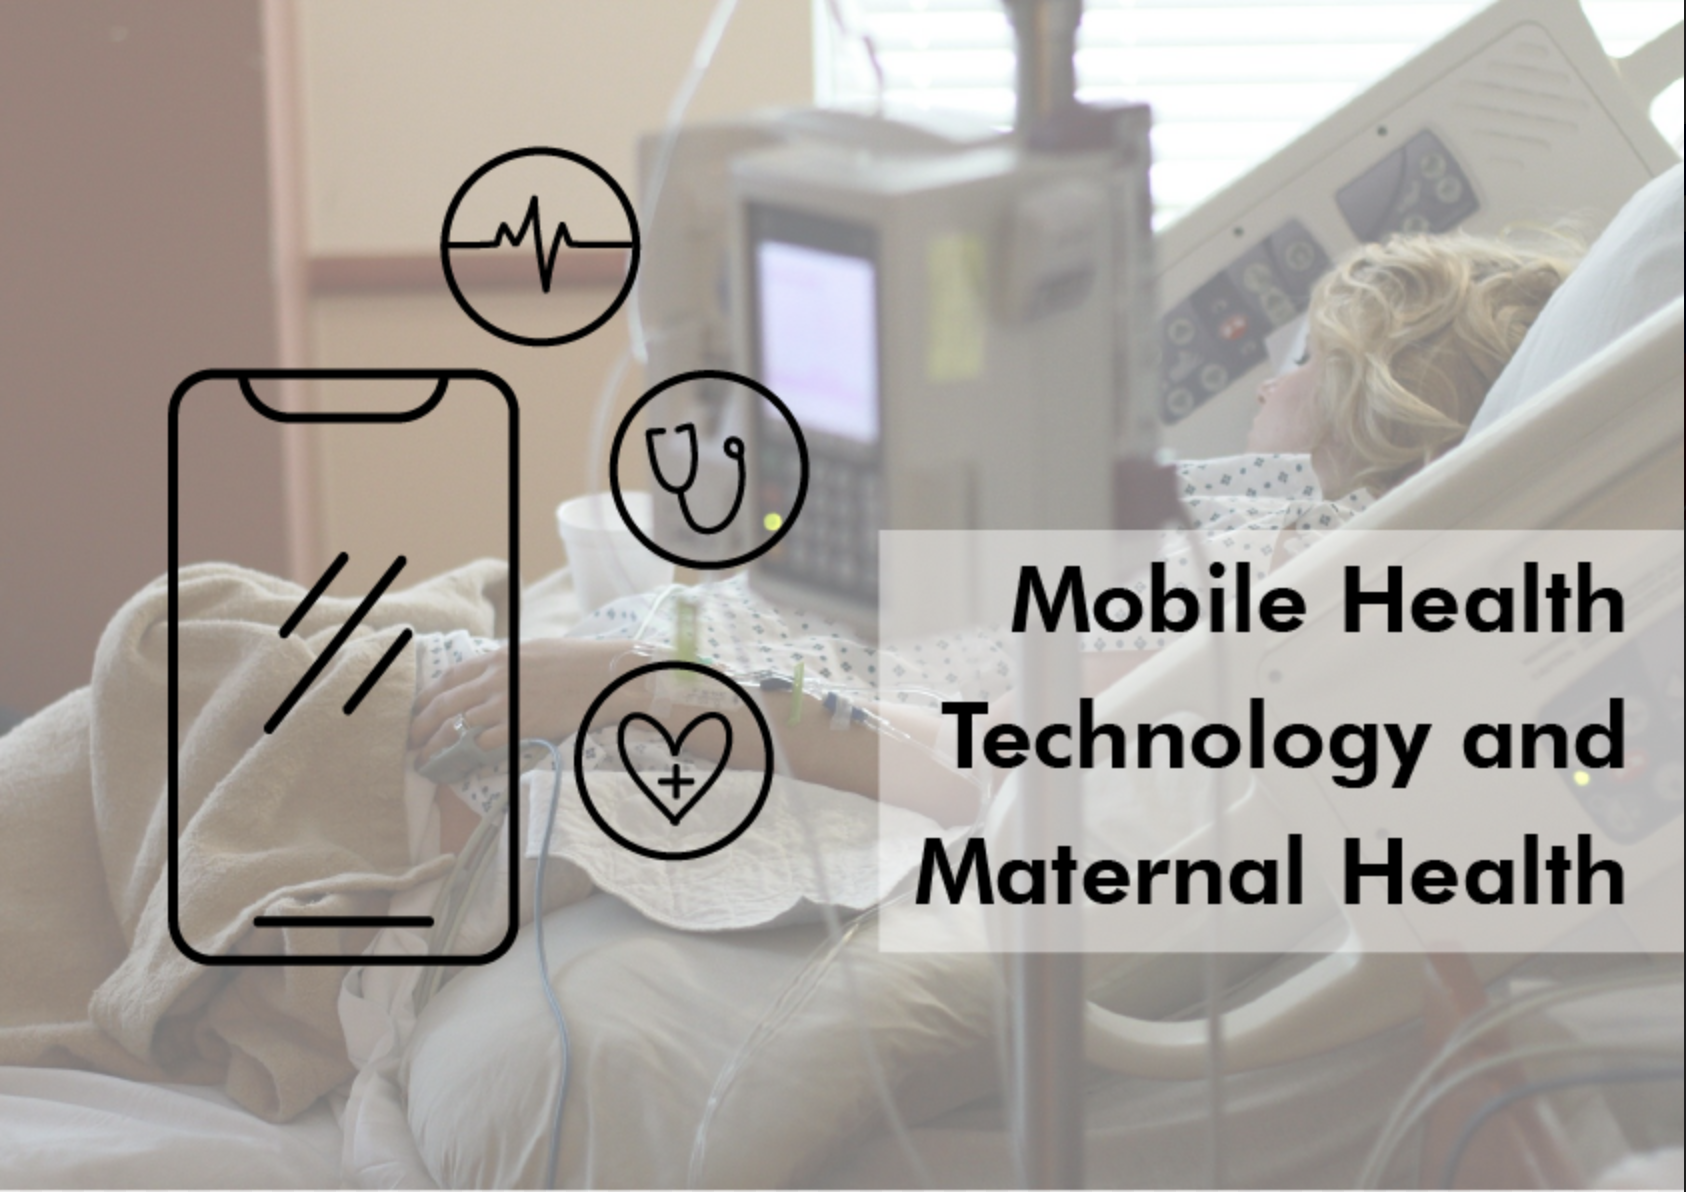 The Applications of Mobile Health Technology (mHealth) in Reducing Maternal Mortality and Improving Maternal Health